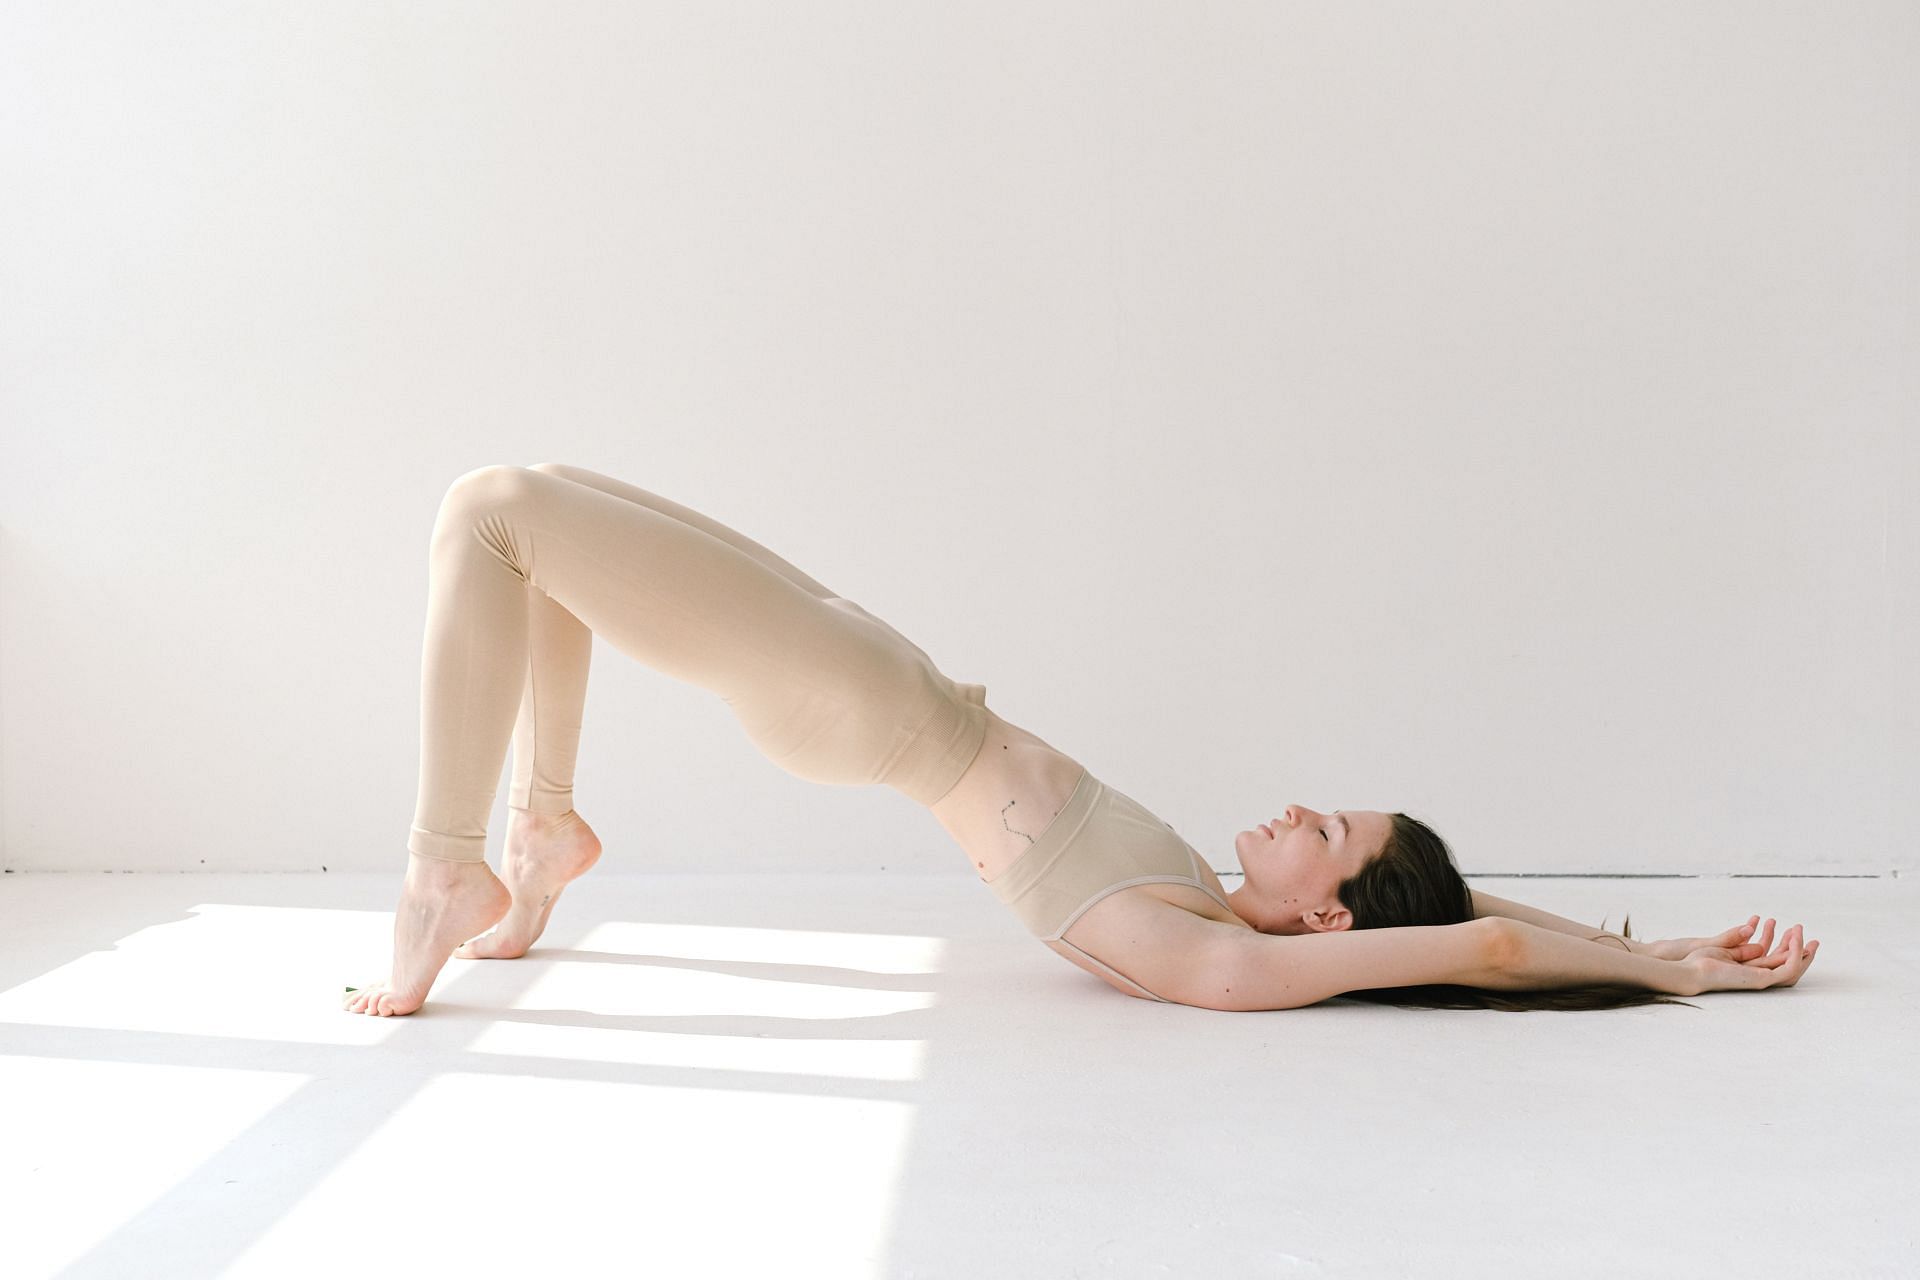 Add more flexibility and core strength with Pilates (Image by Anna Shvets / Pexels)